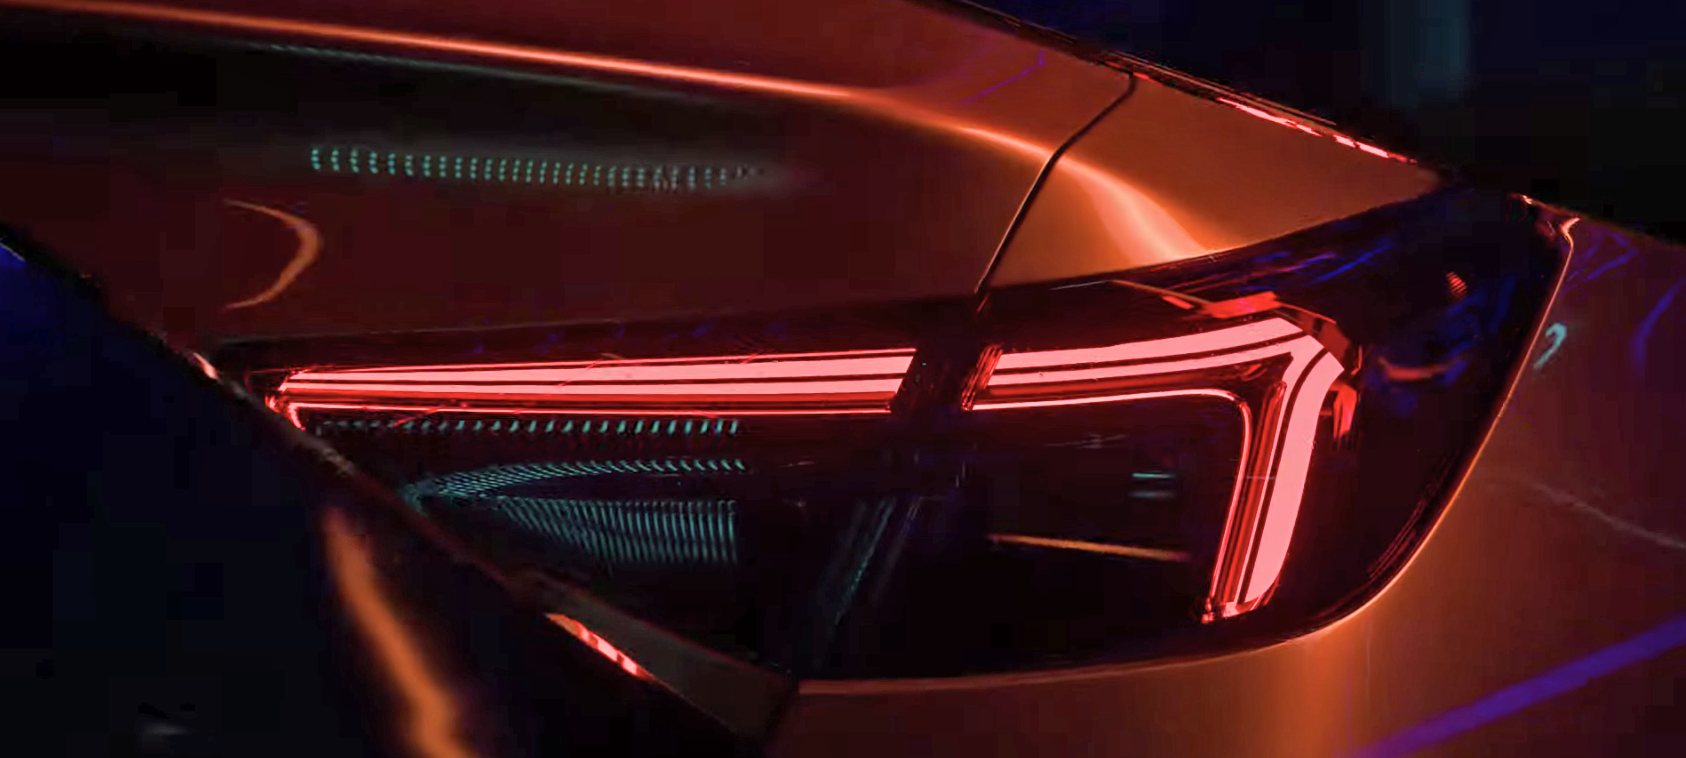 Official 2022 Civic Sedan Teaser! Concept Reveal Coming ...